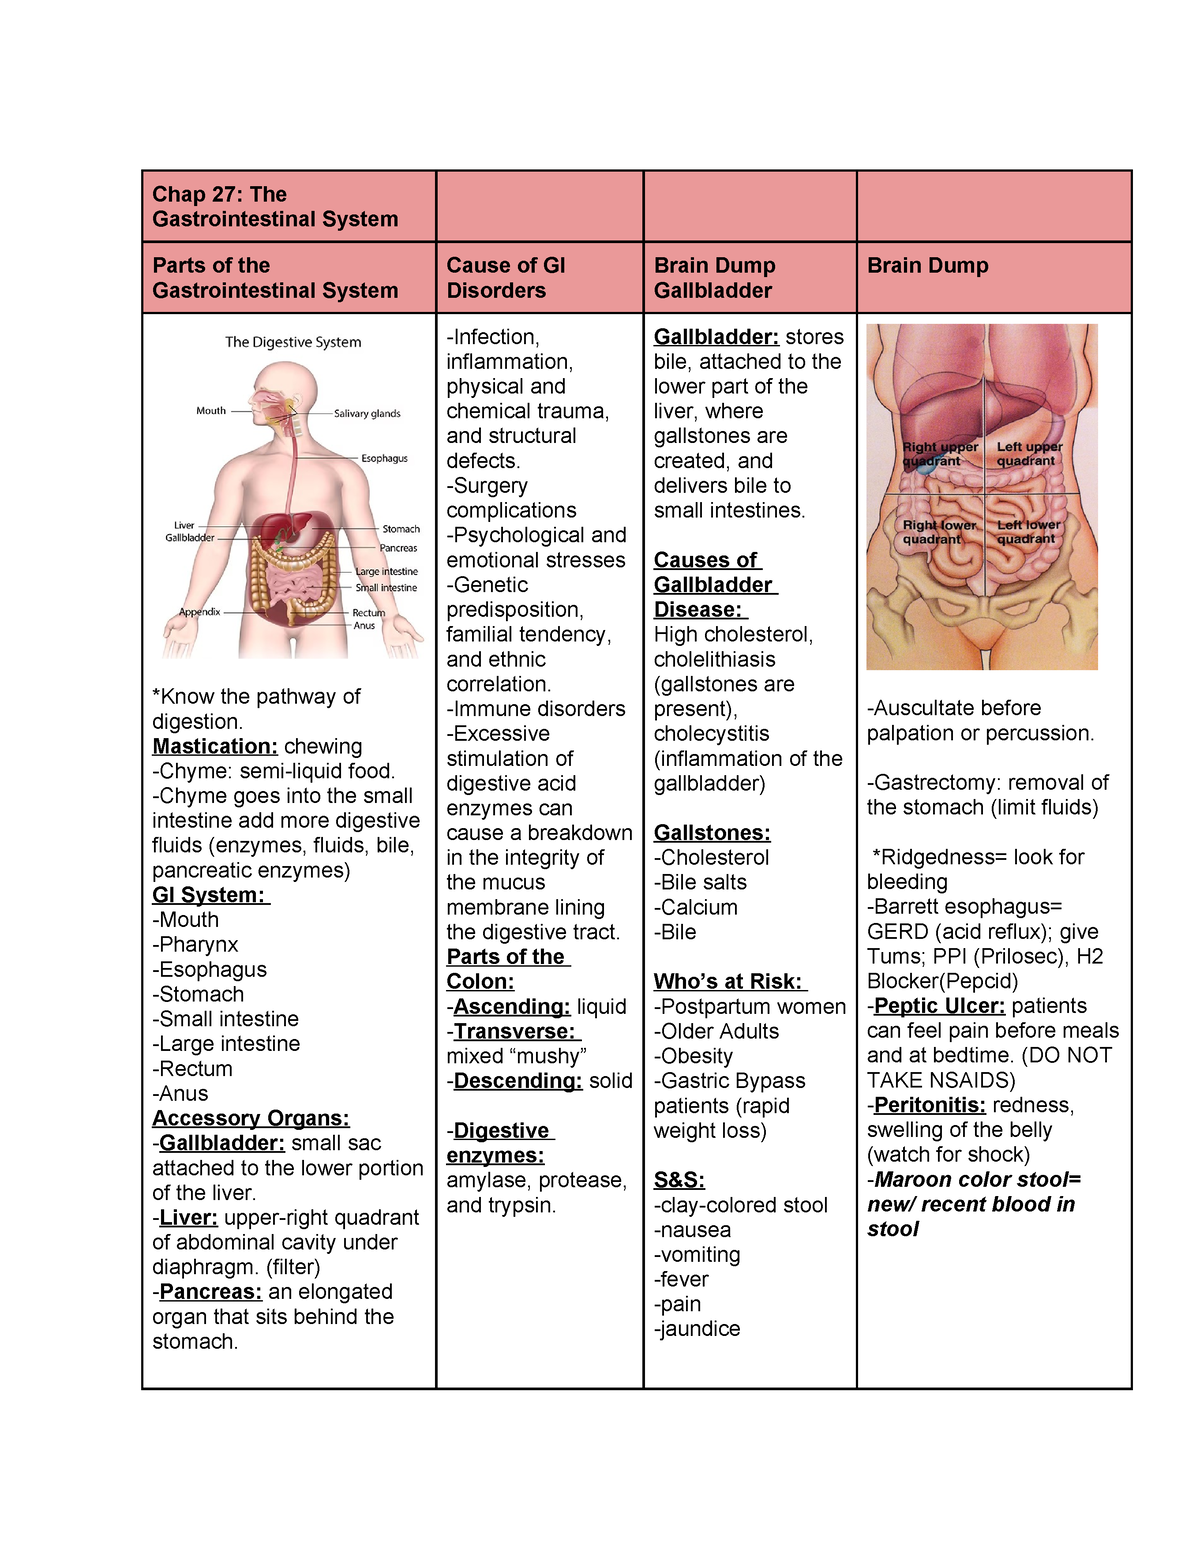 Chap 27 The Gastrointestinal System - Chap 27: The Gastrointestinal ...